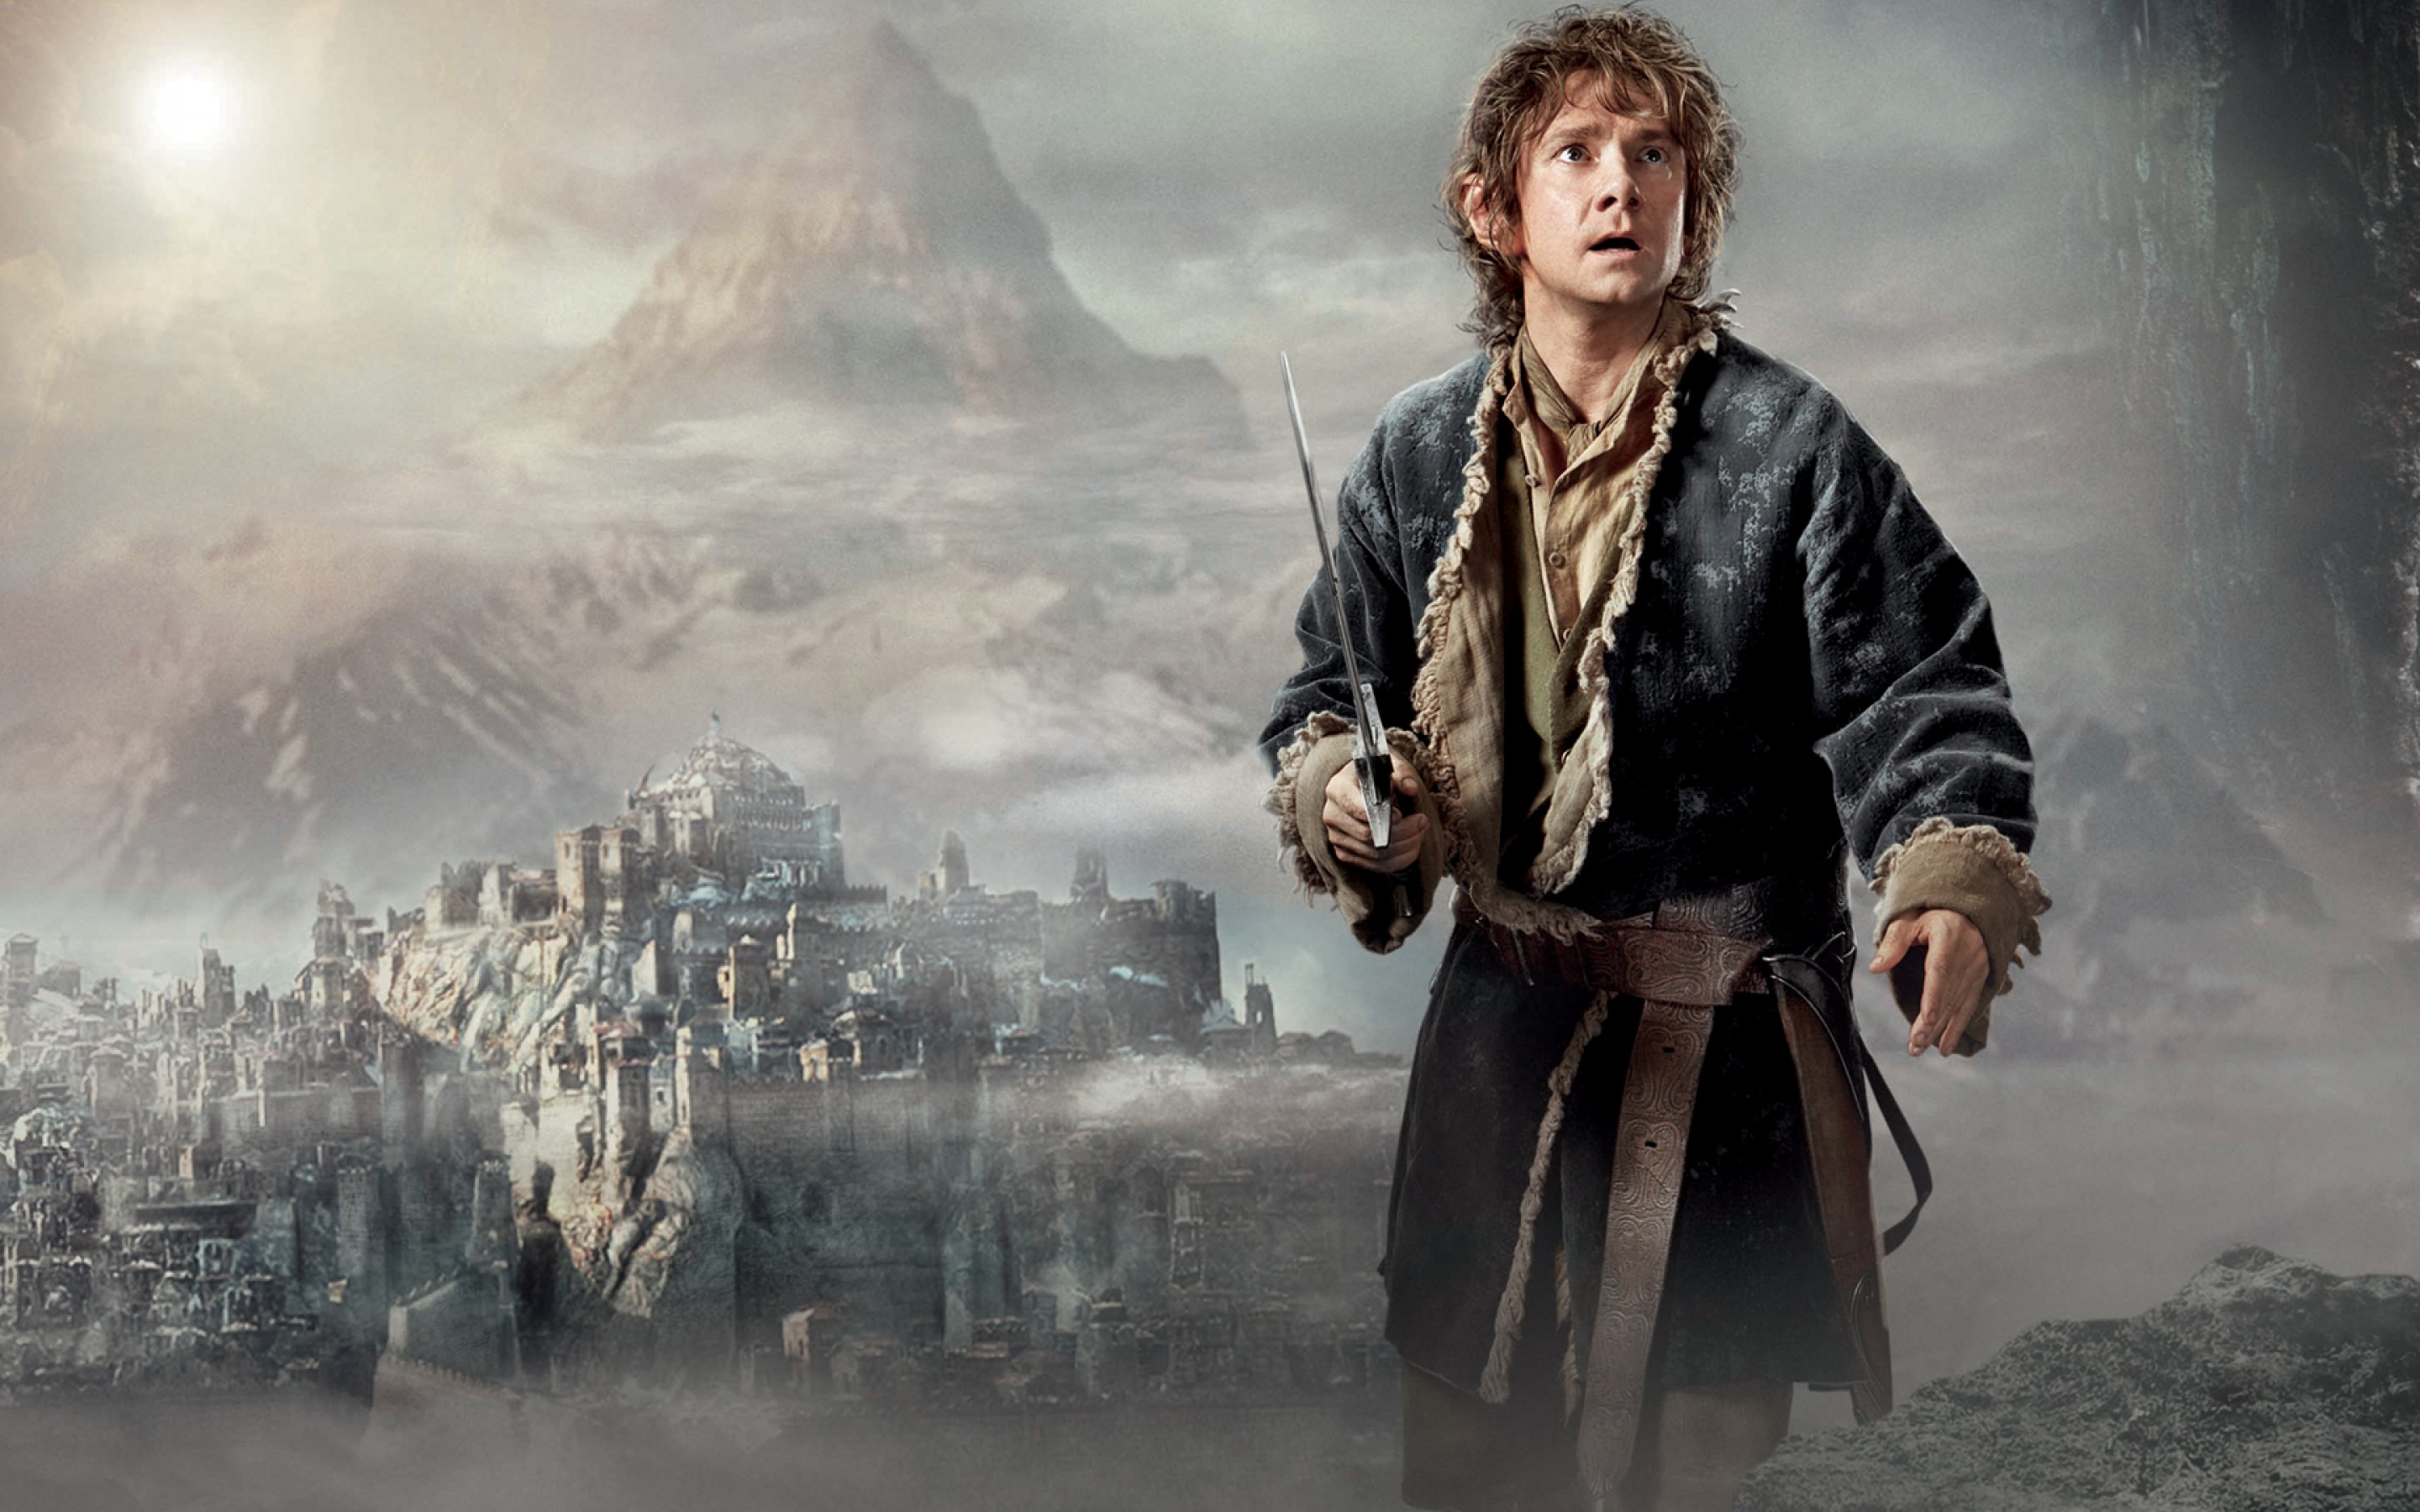 free for apple download The Hobbit: The Desolation of Smaug